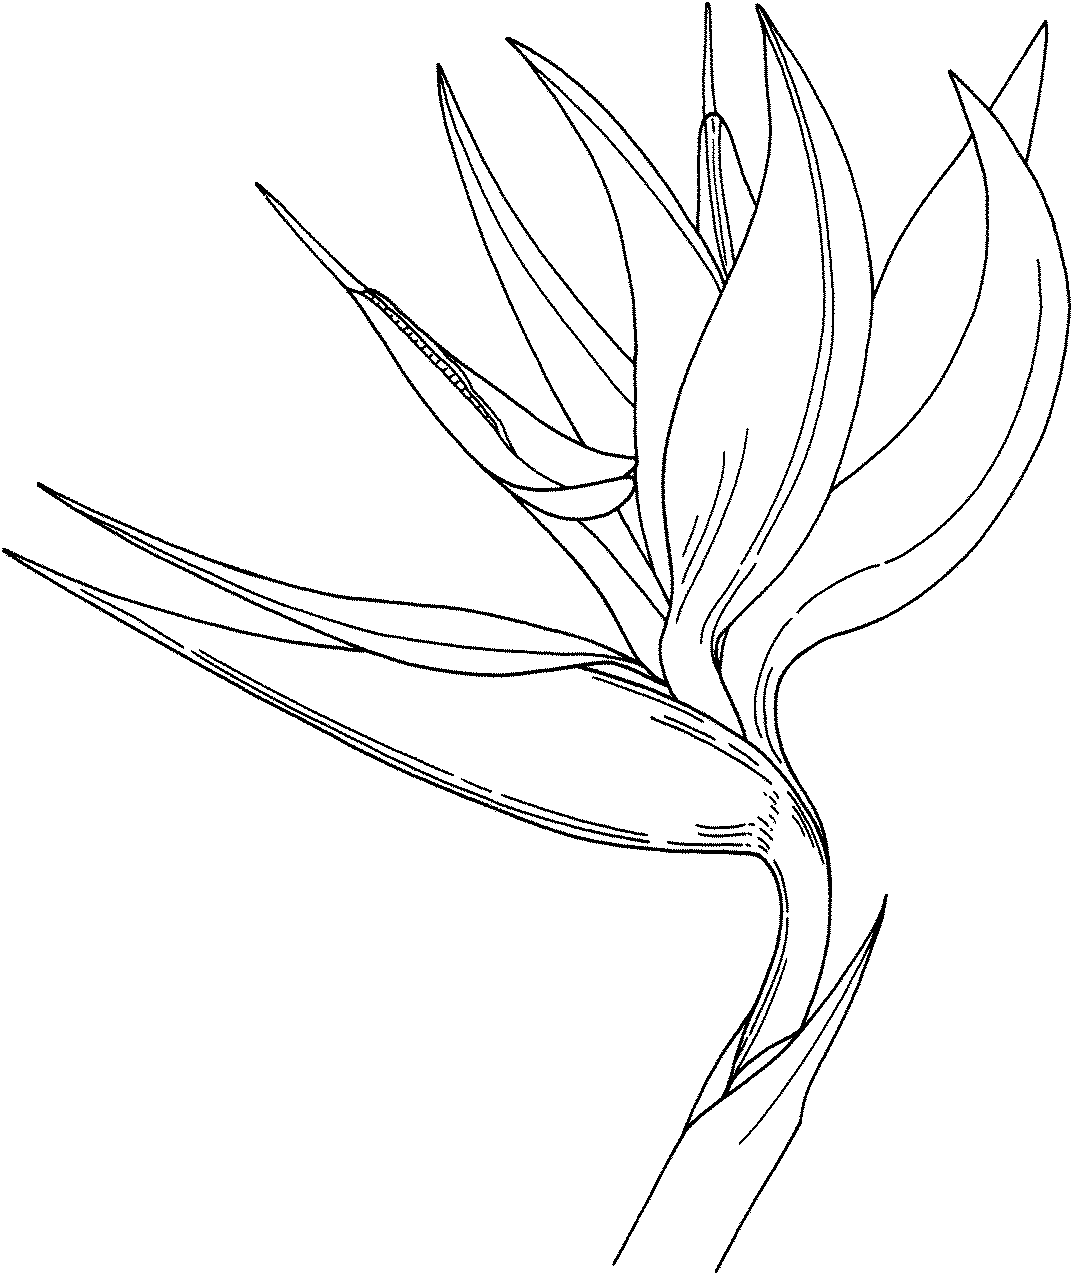 Bird of Paradise Flower Coloring Online.